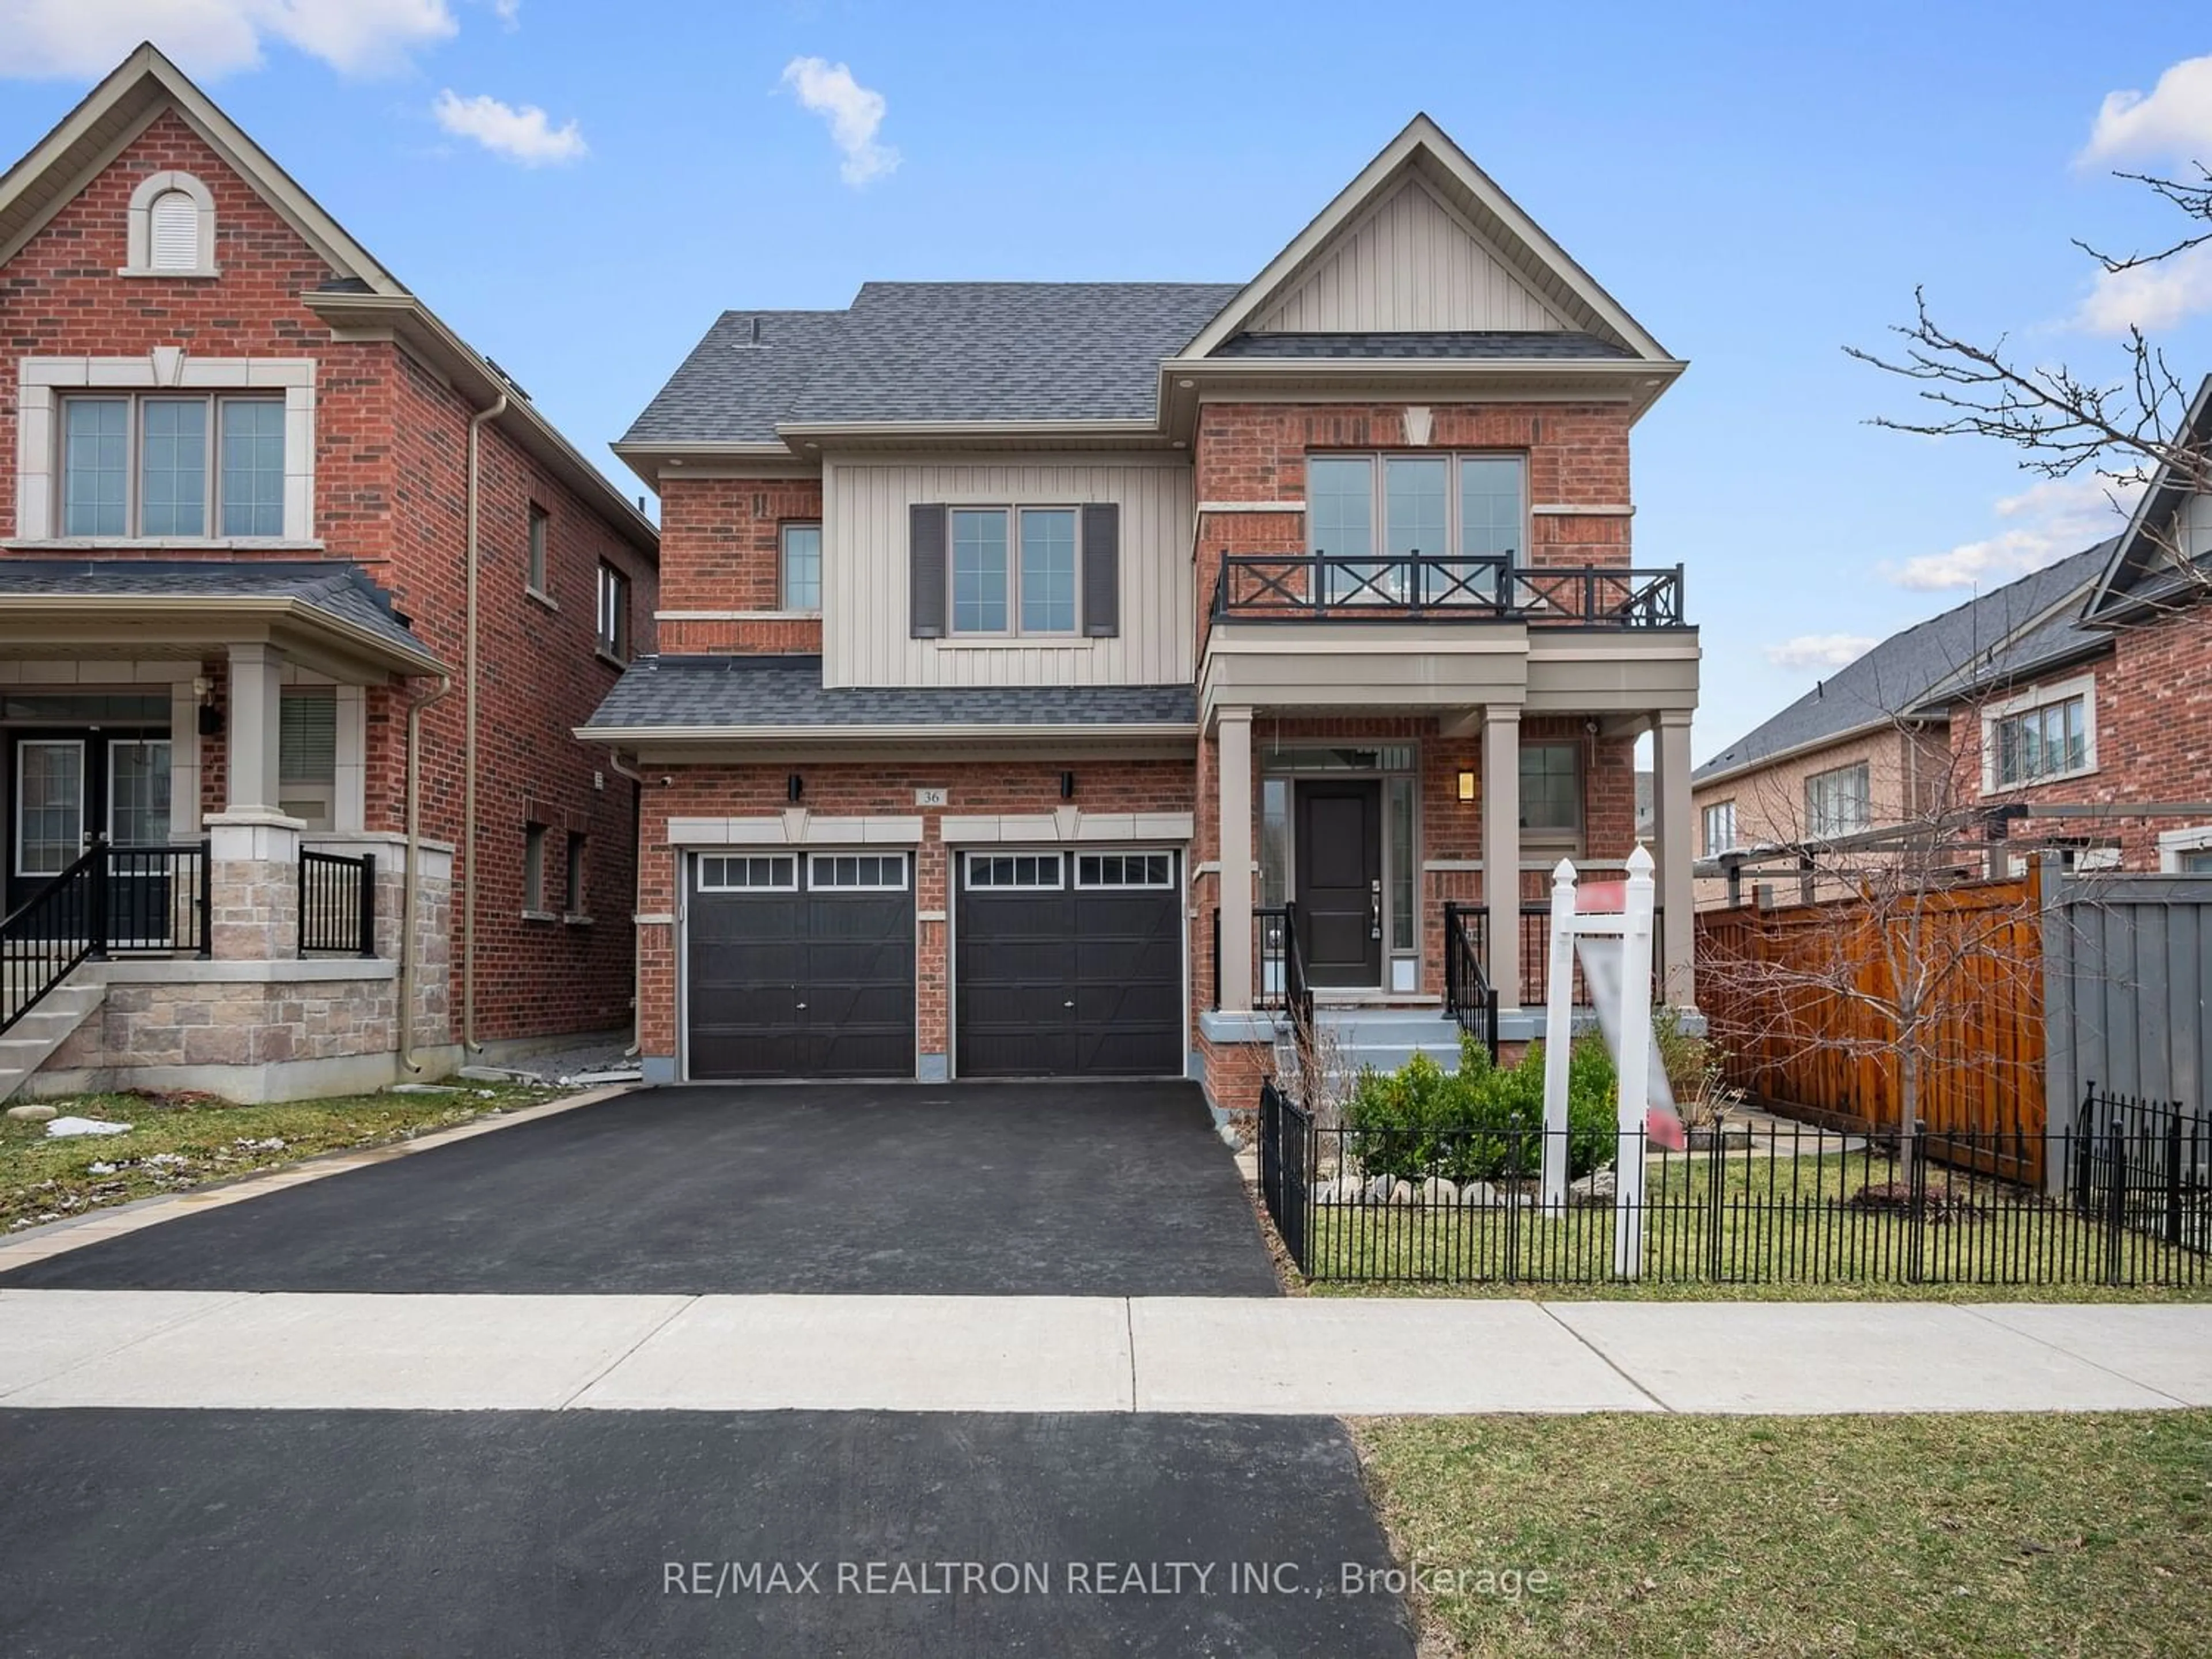 Home with brick exterior material for 36 Snap Dragon Tr, East Gwillimbury Ontario L9N 0S8